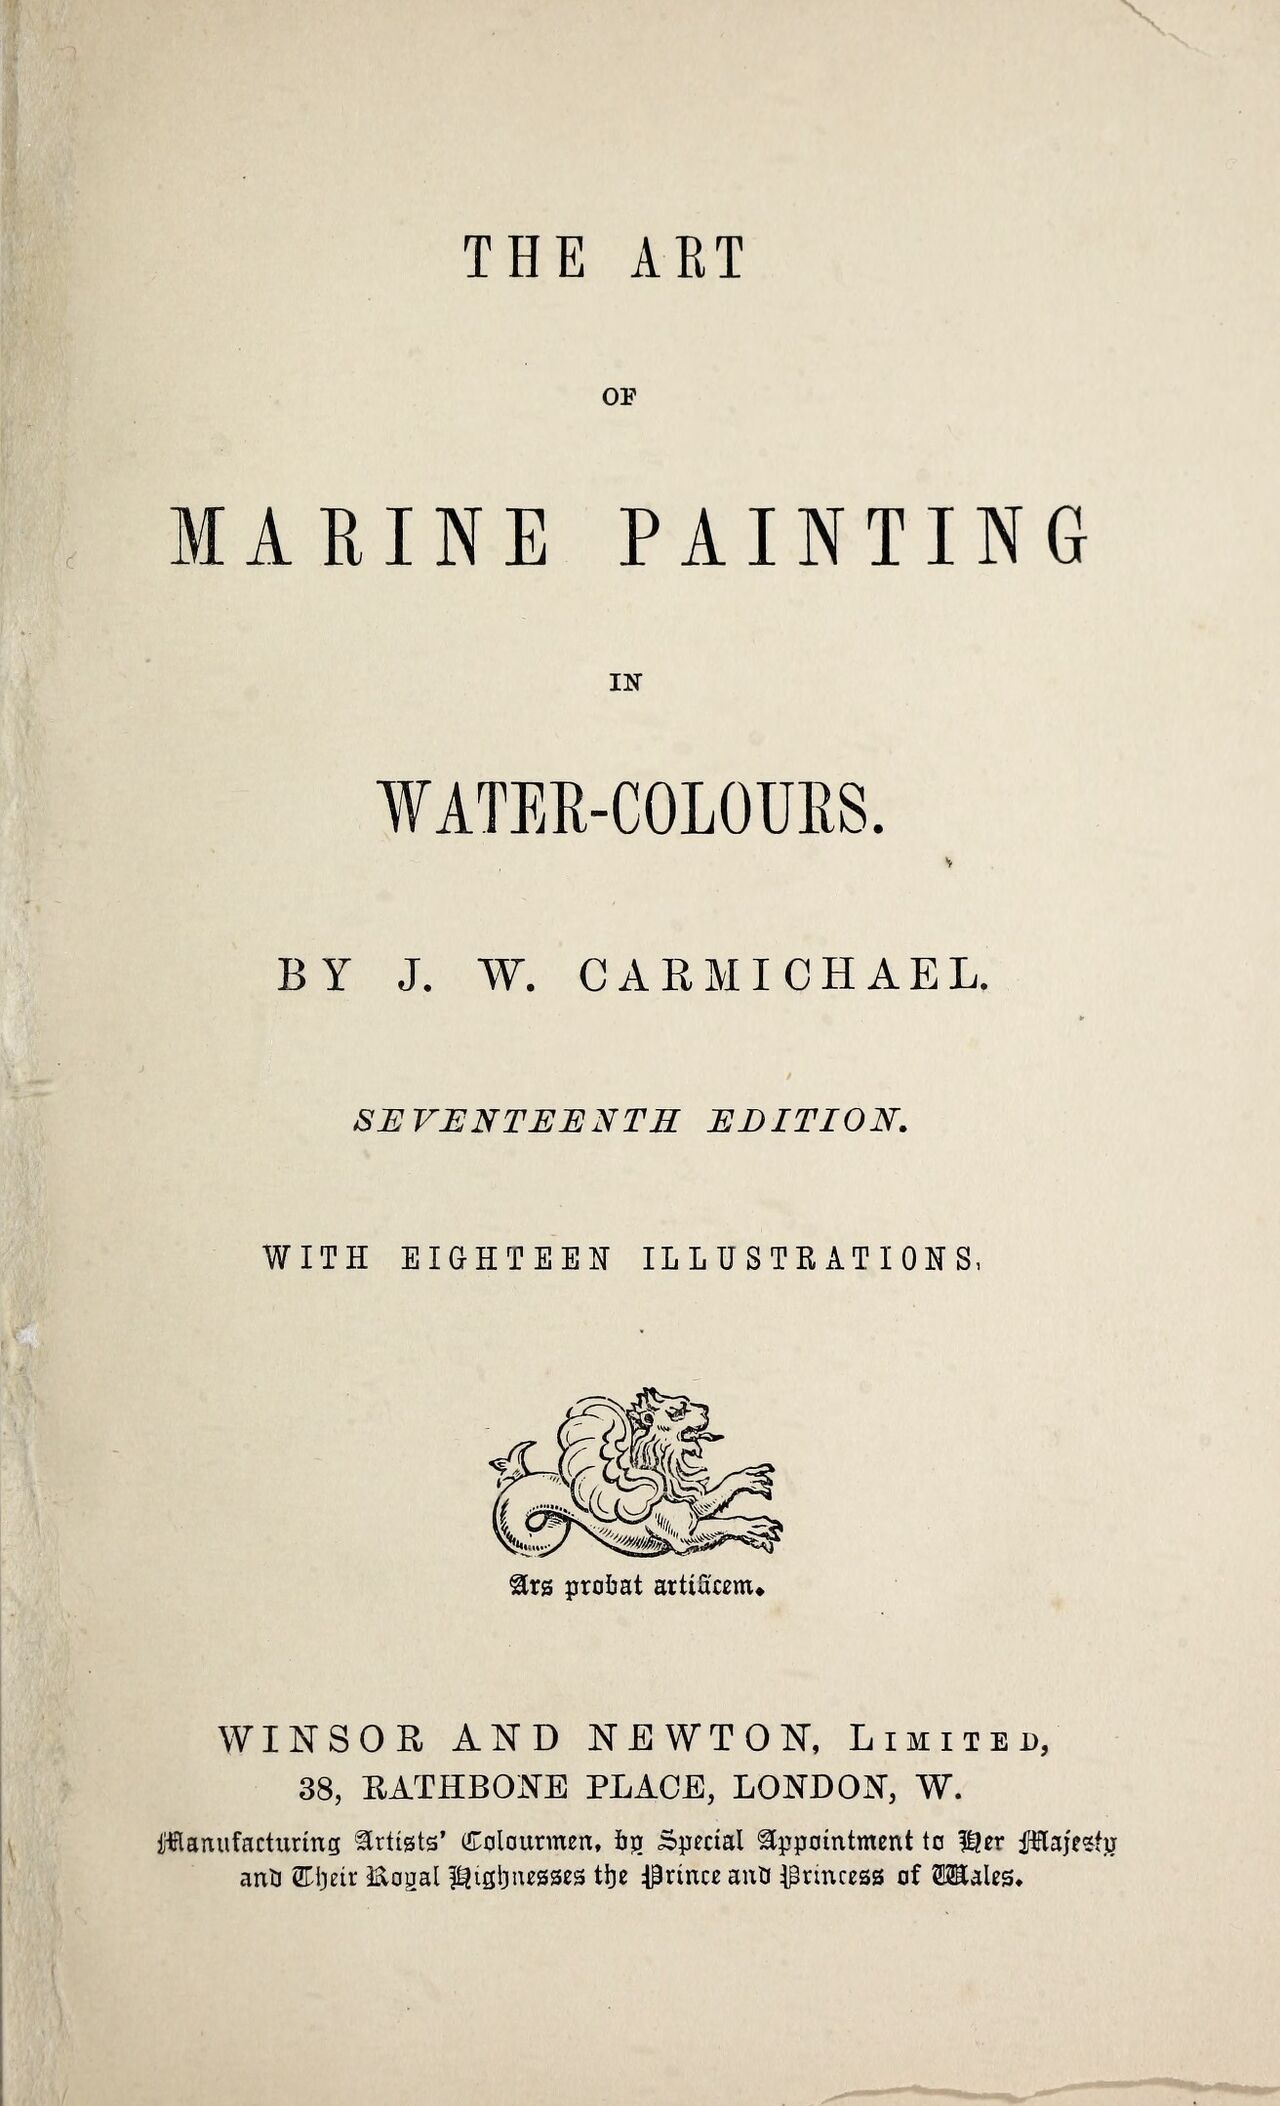 [John Wilson Carmichael] The art of marine painting in water-colours [English] 10